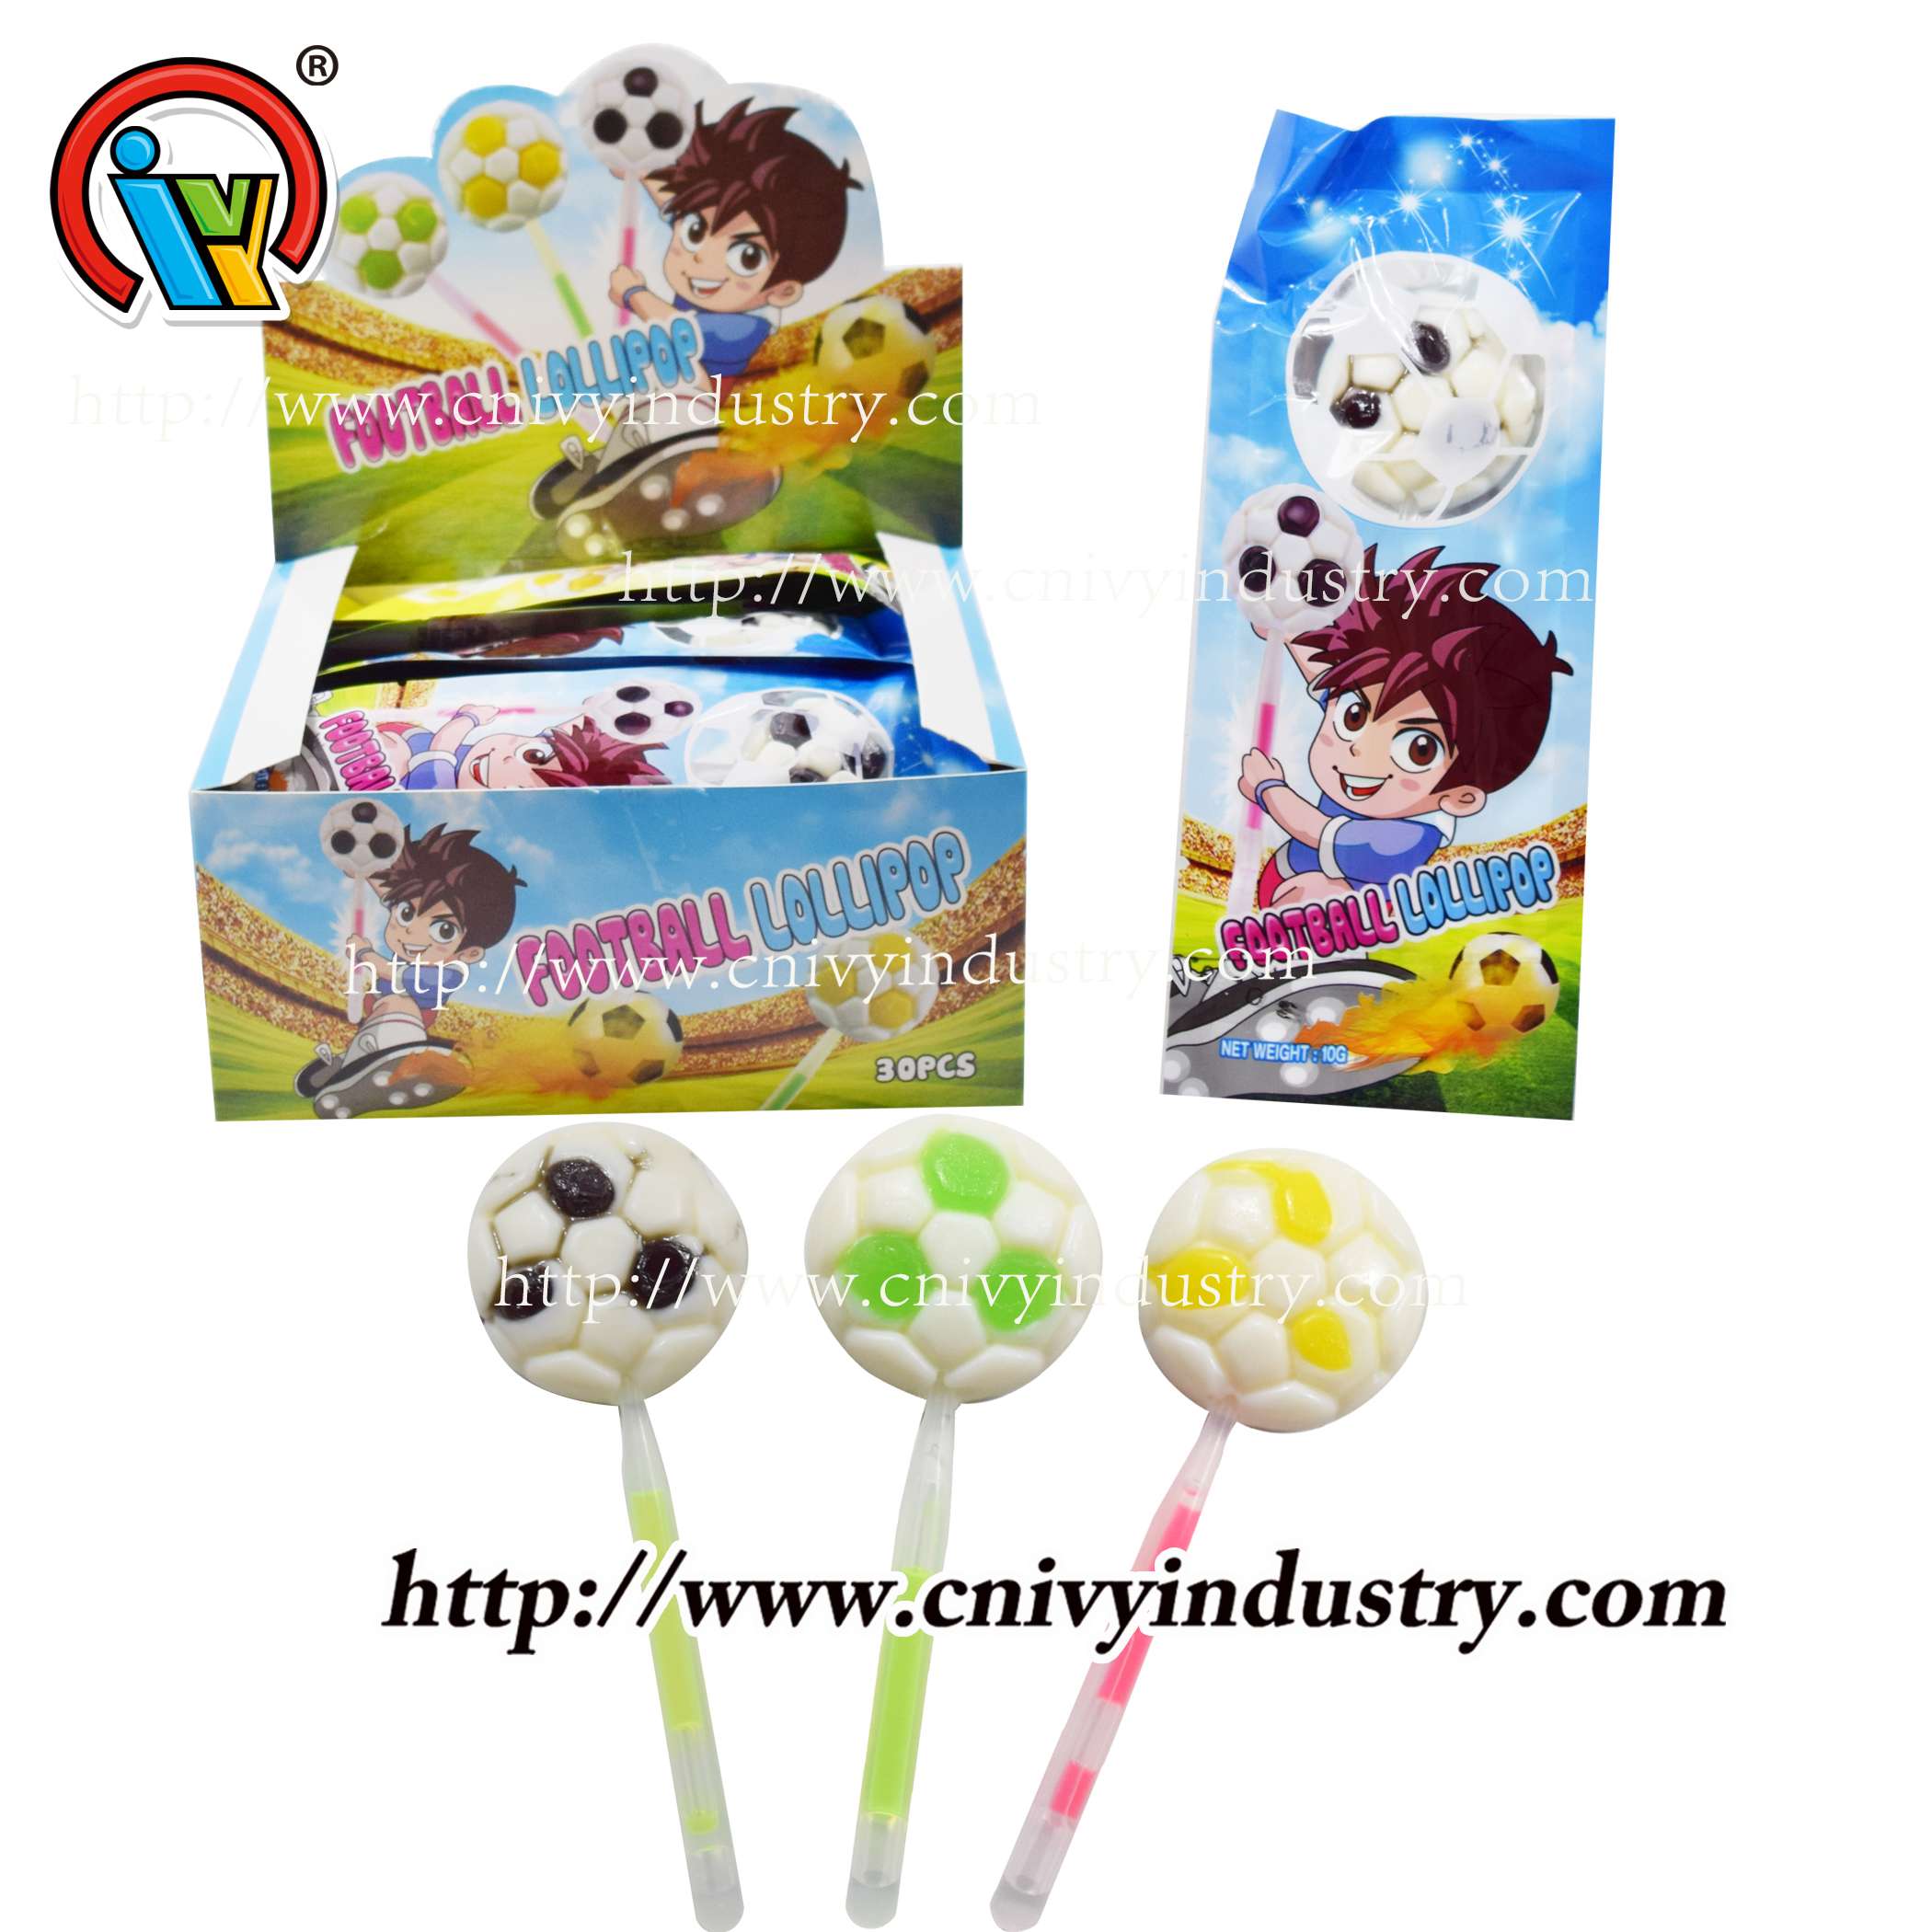 printed marshmallow candy with jam filling